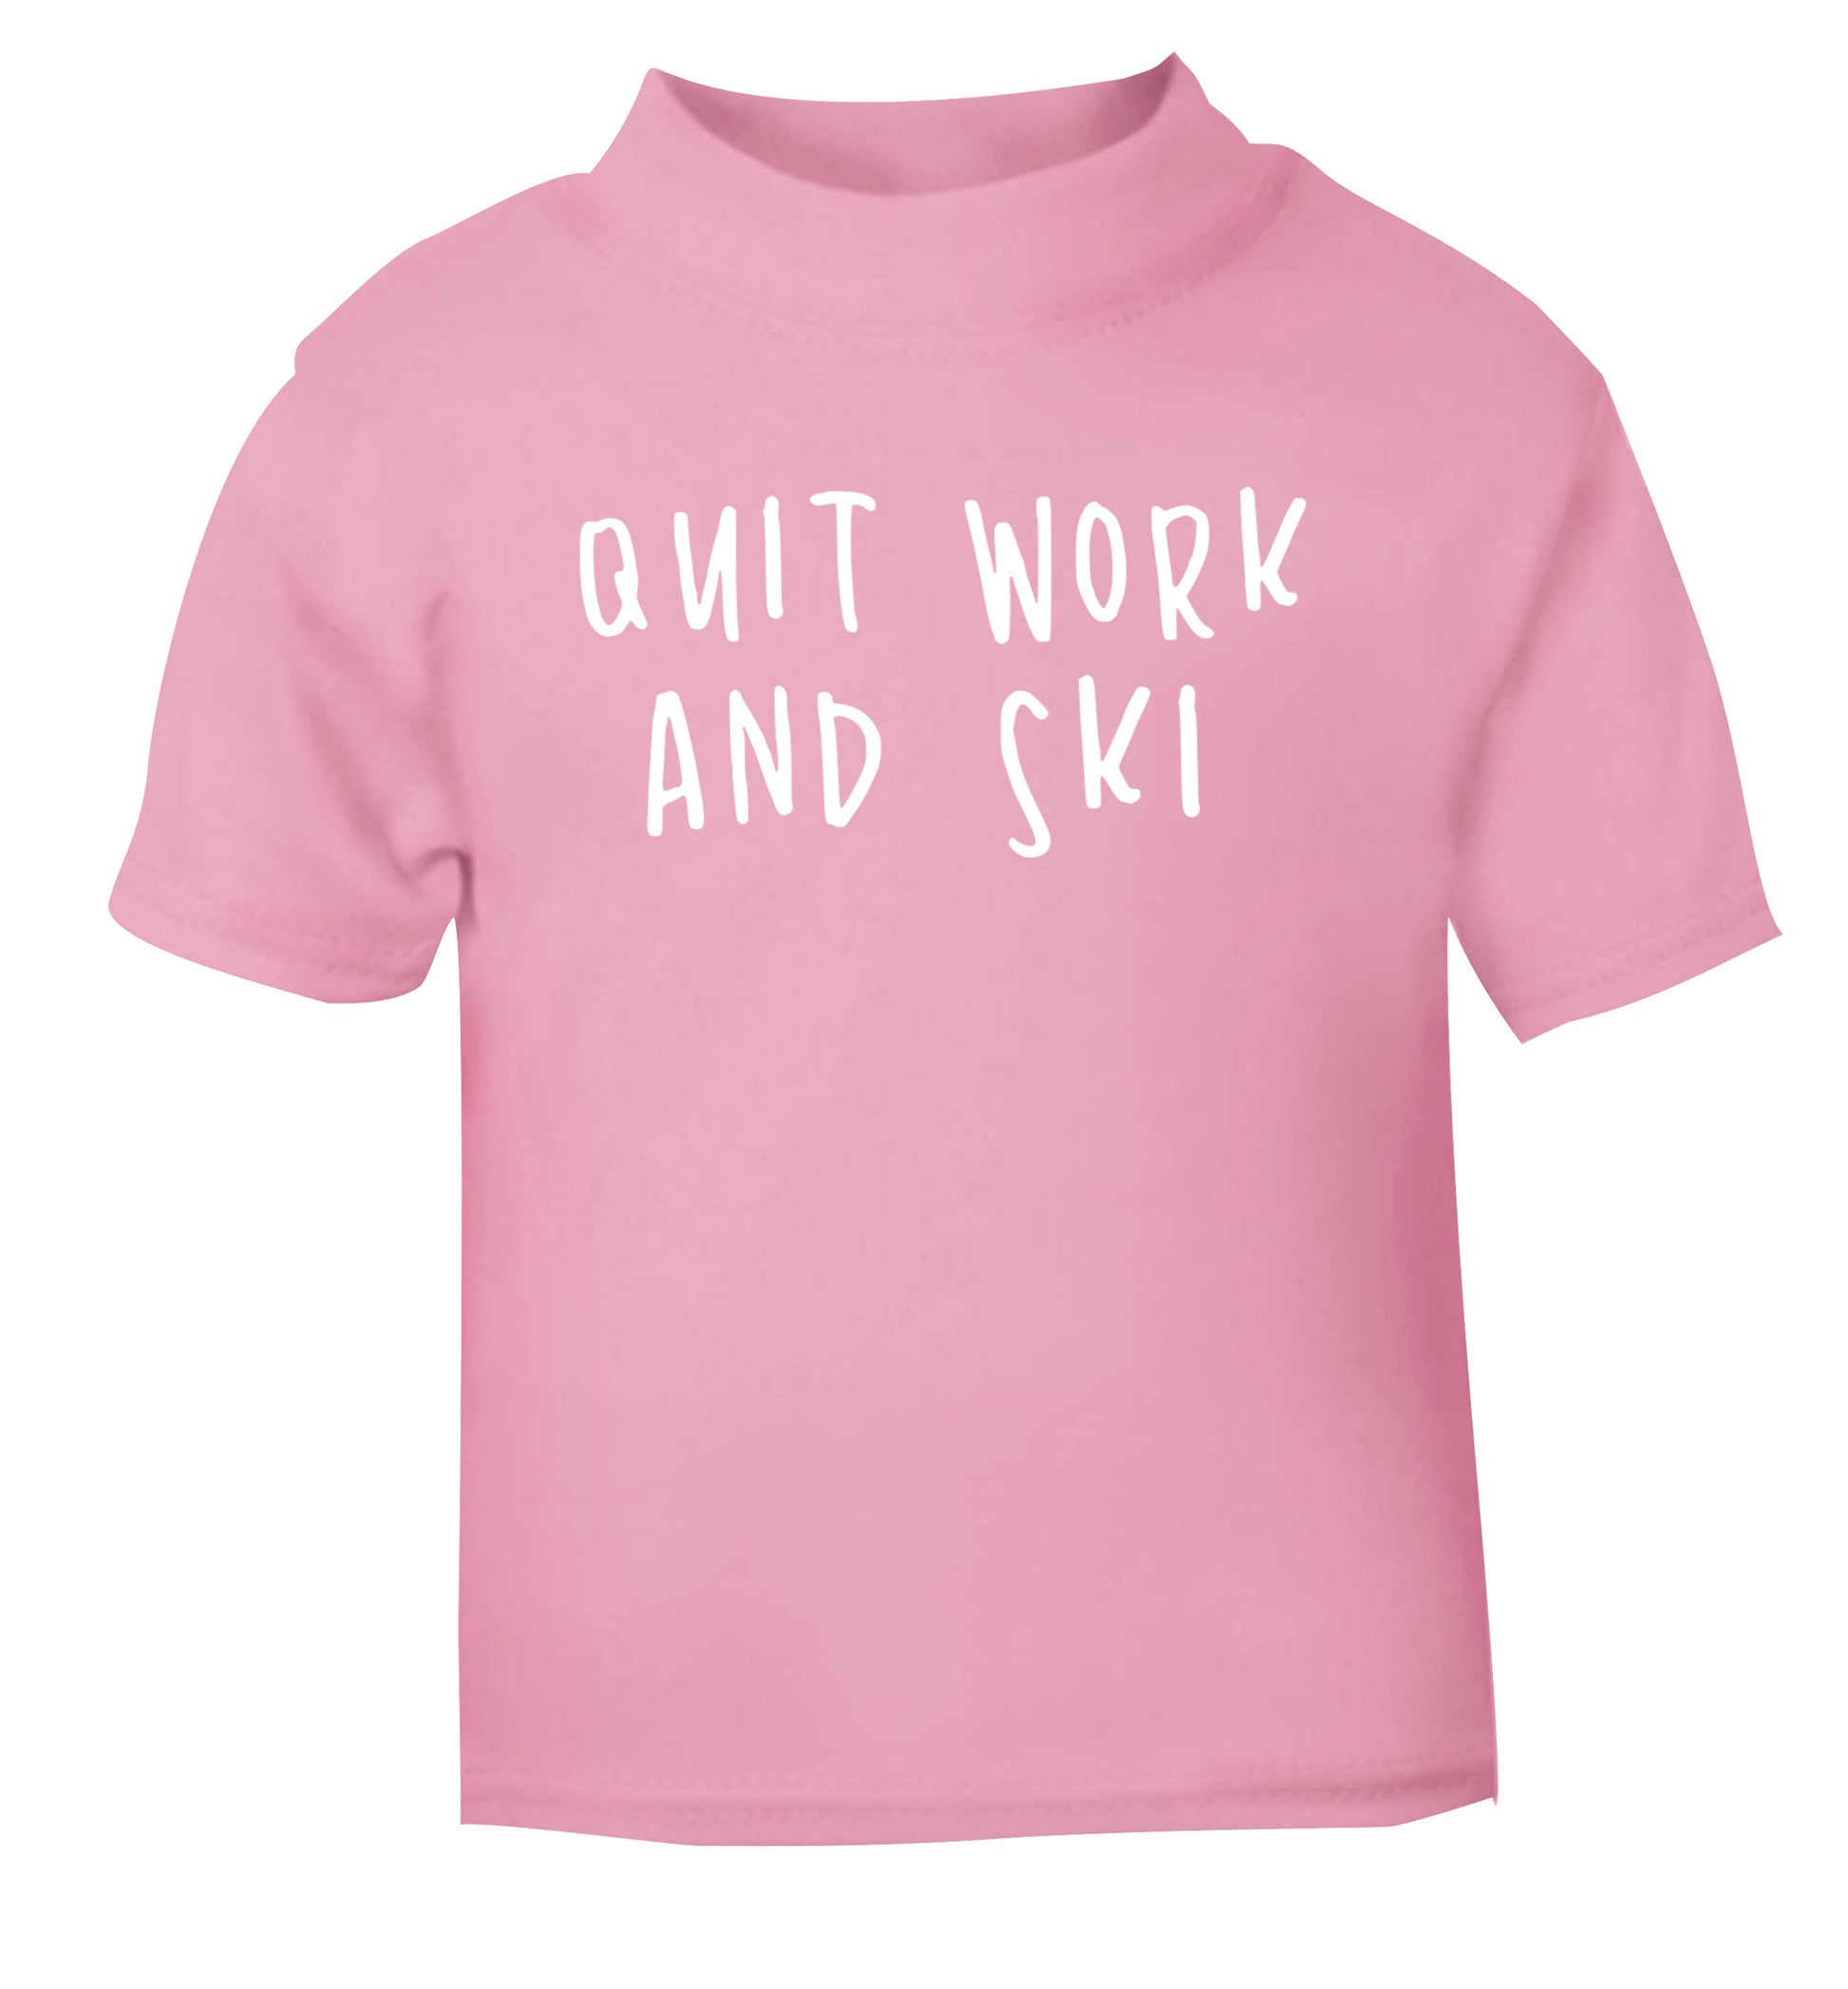 Quit work and ski light pink Baby Toddler Tshirt 2 Years